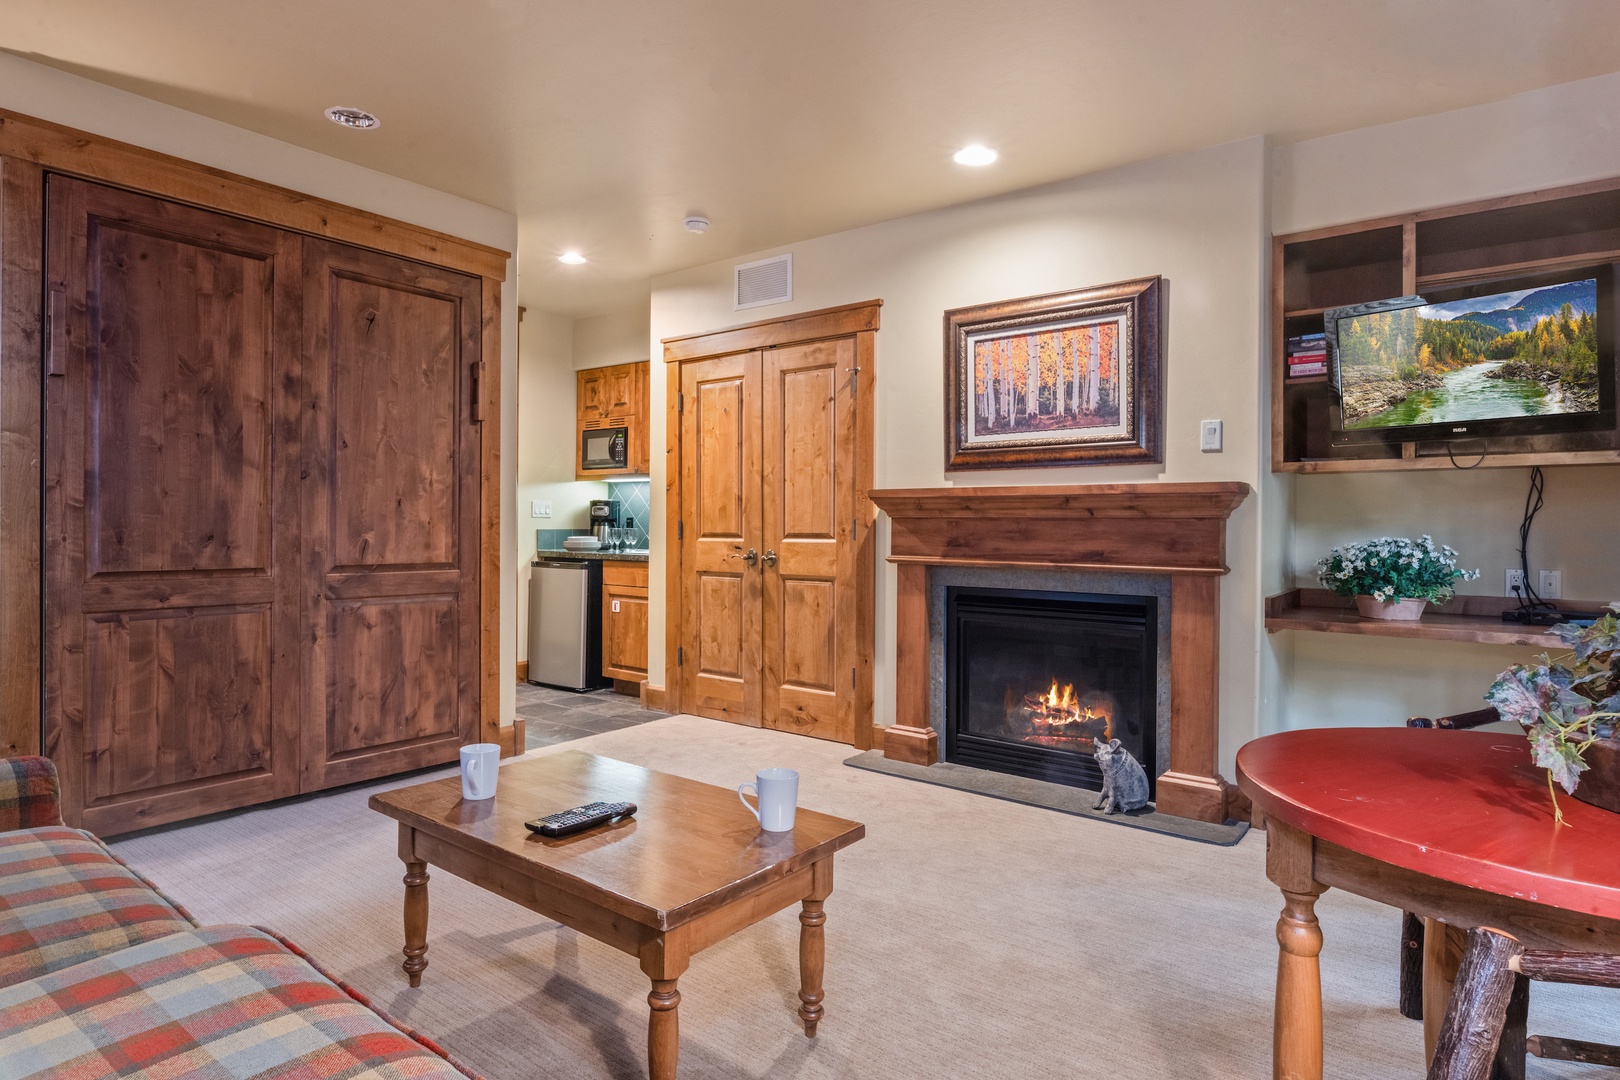 Living room with Gas fireplace. Please note this space doubles as a guest room with murphy bed